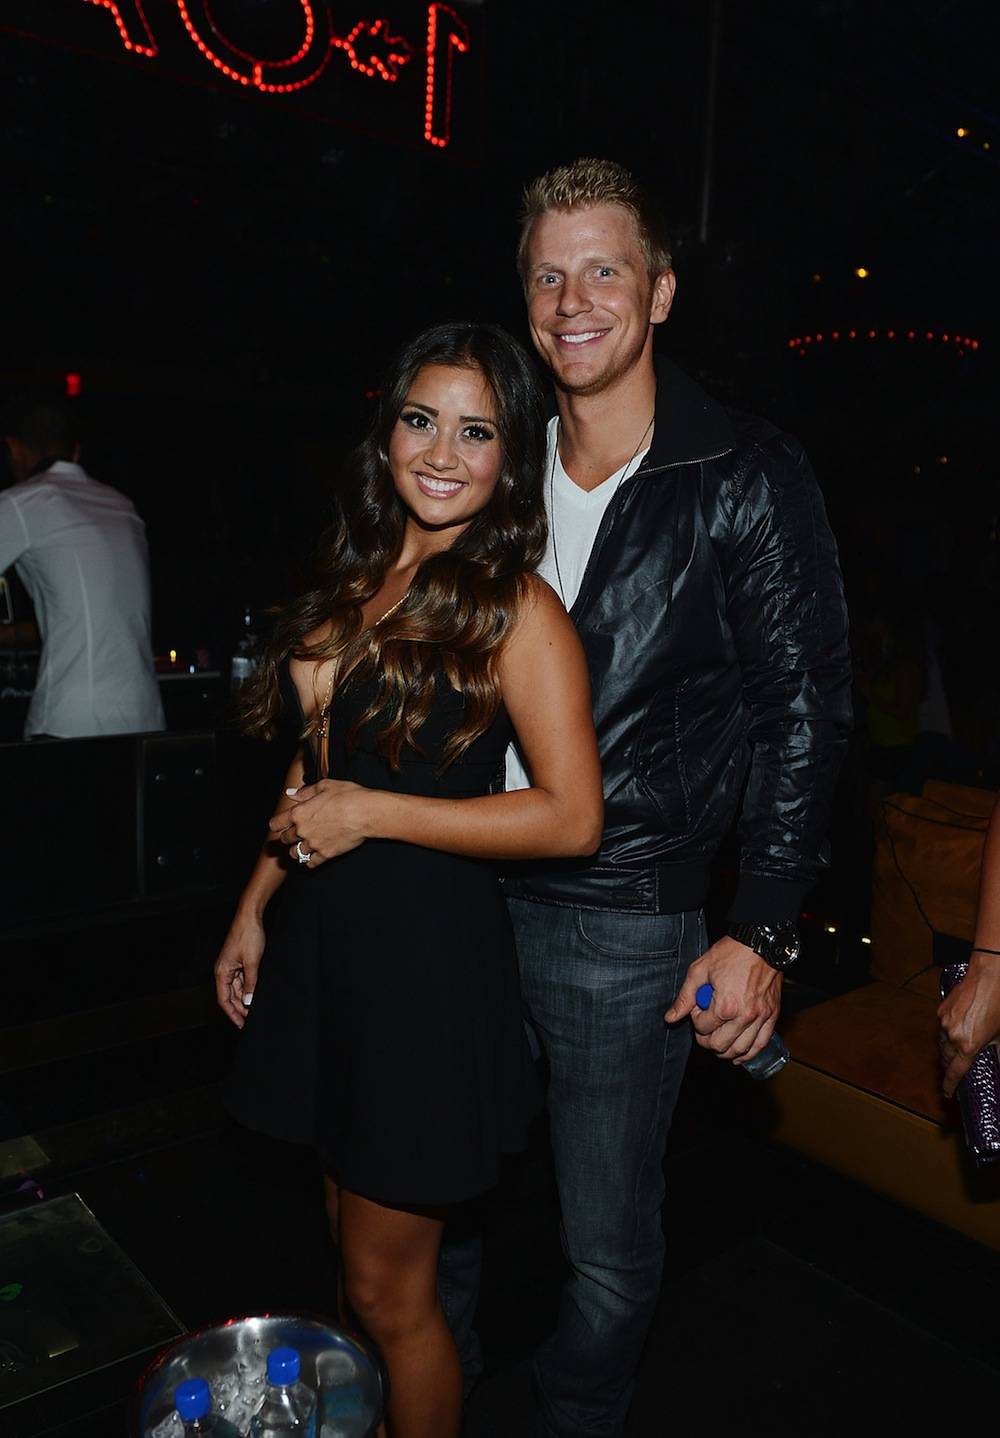 The Bachelor Star Sean Lowe At 1 OAK Nightclub At The Mirage Hotel and Casino